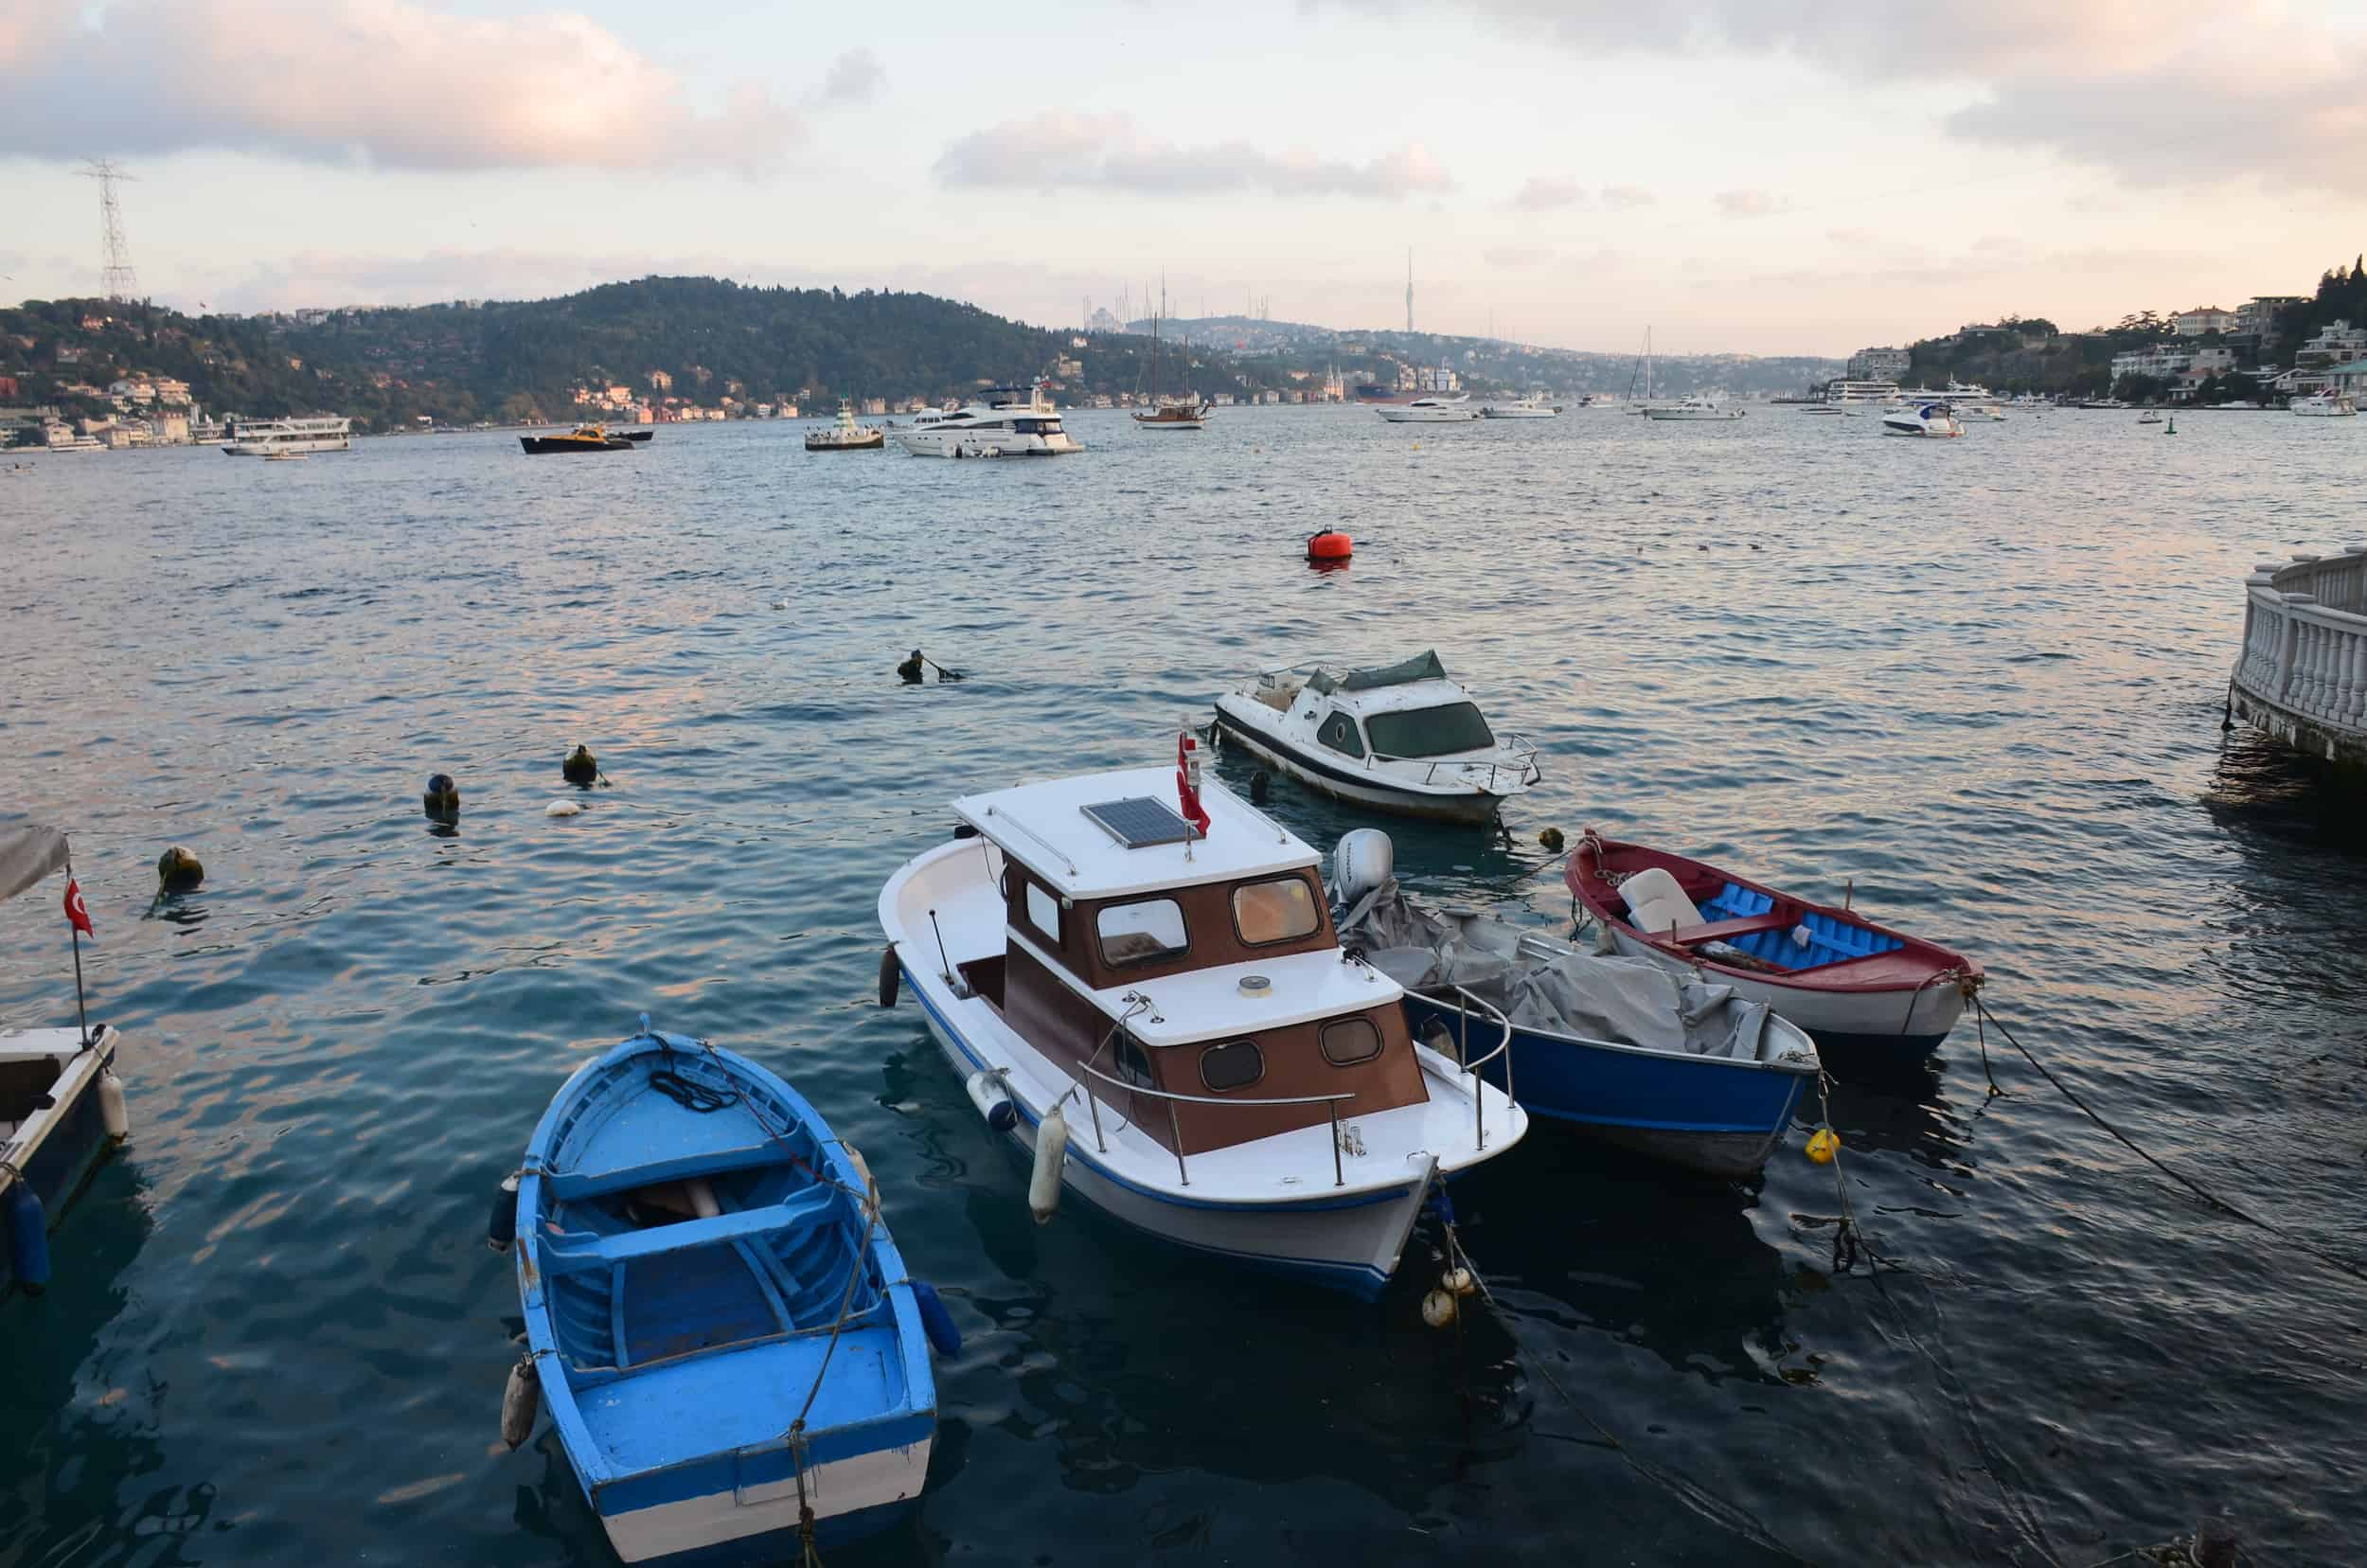 Looking out onto the Bosporus in Bebek, Istanbul, Turkey